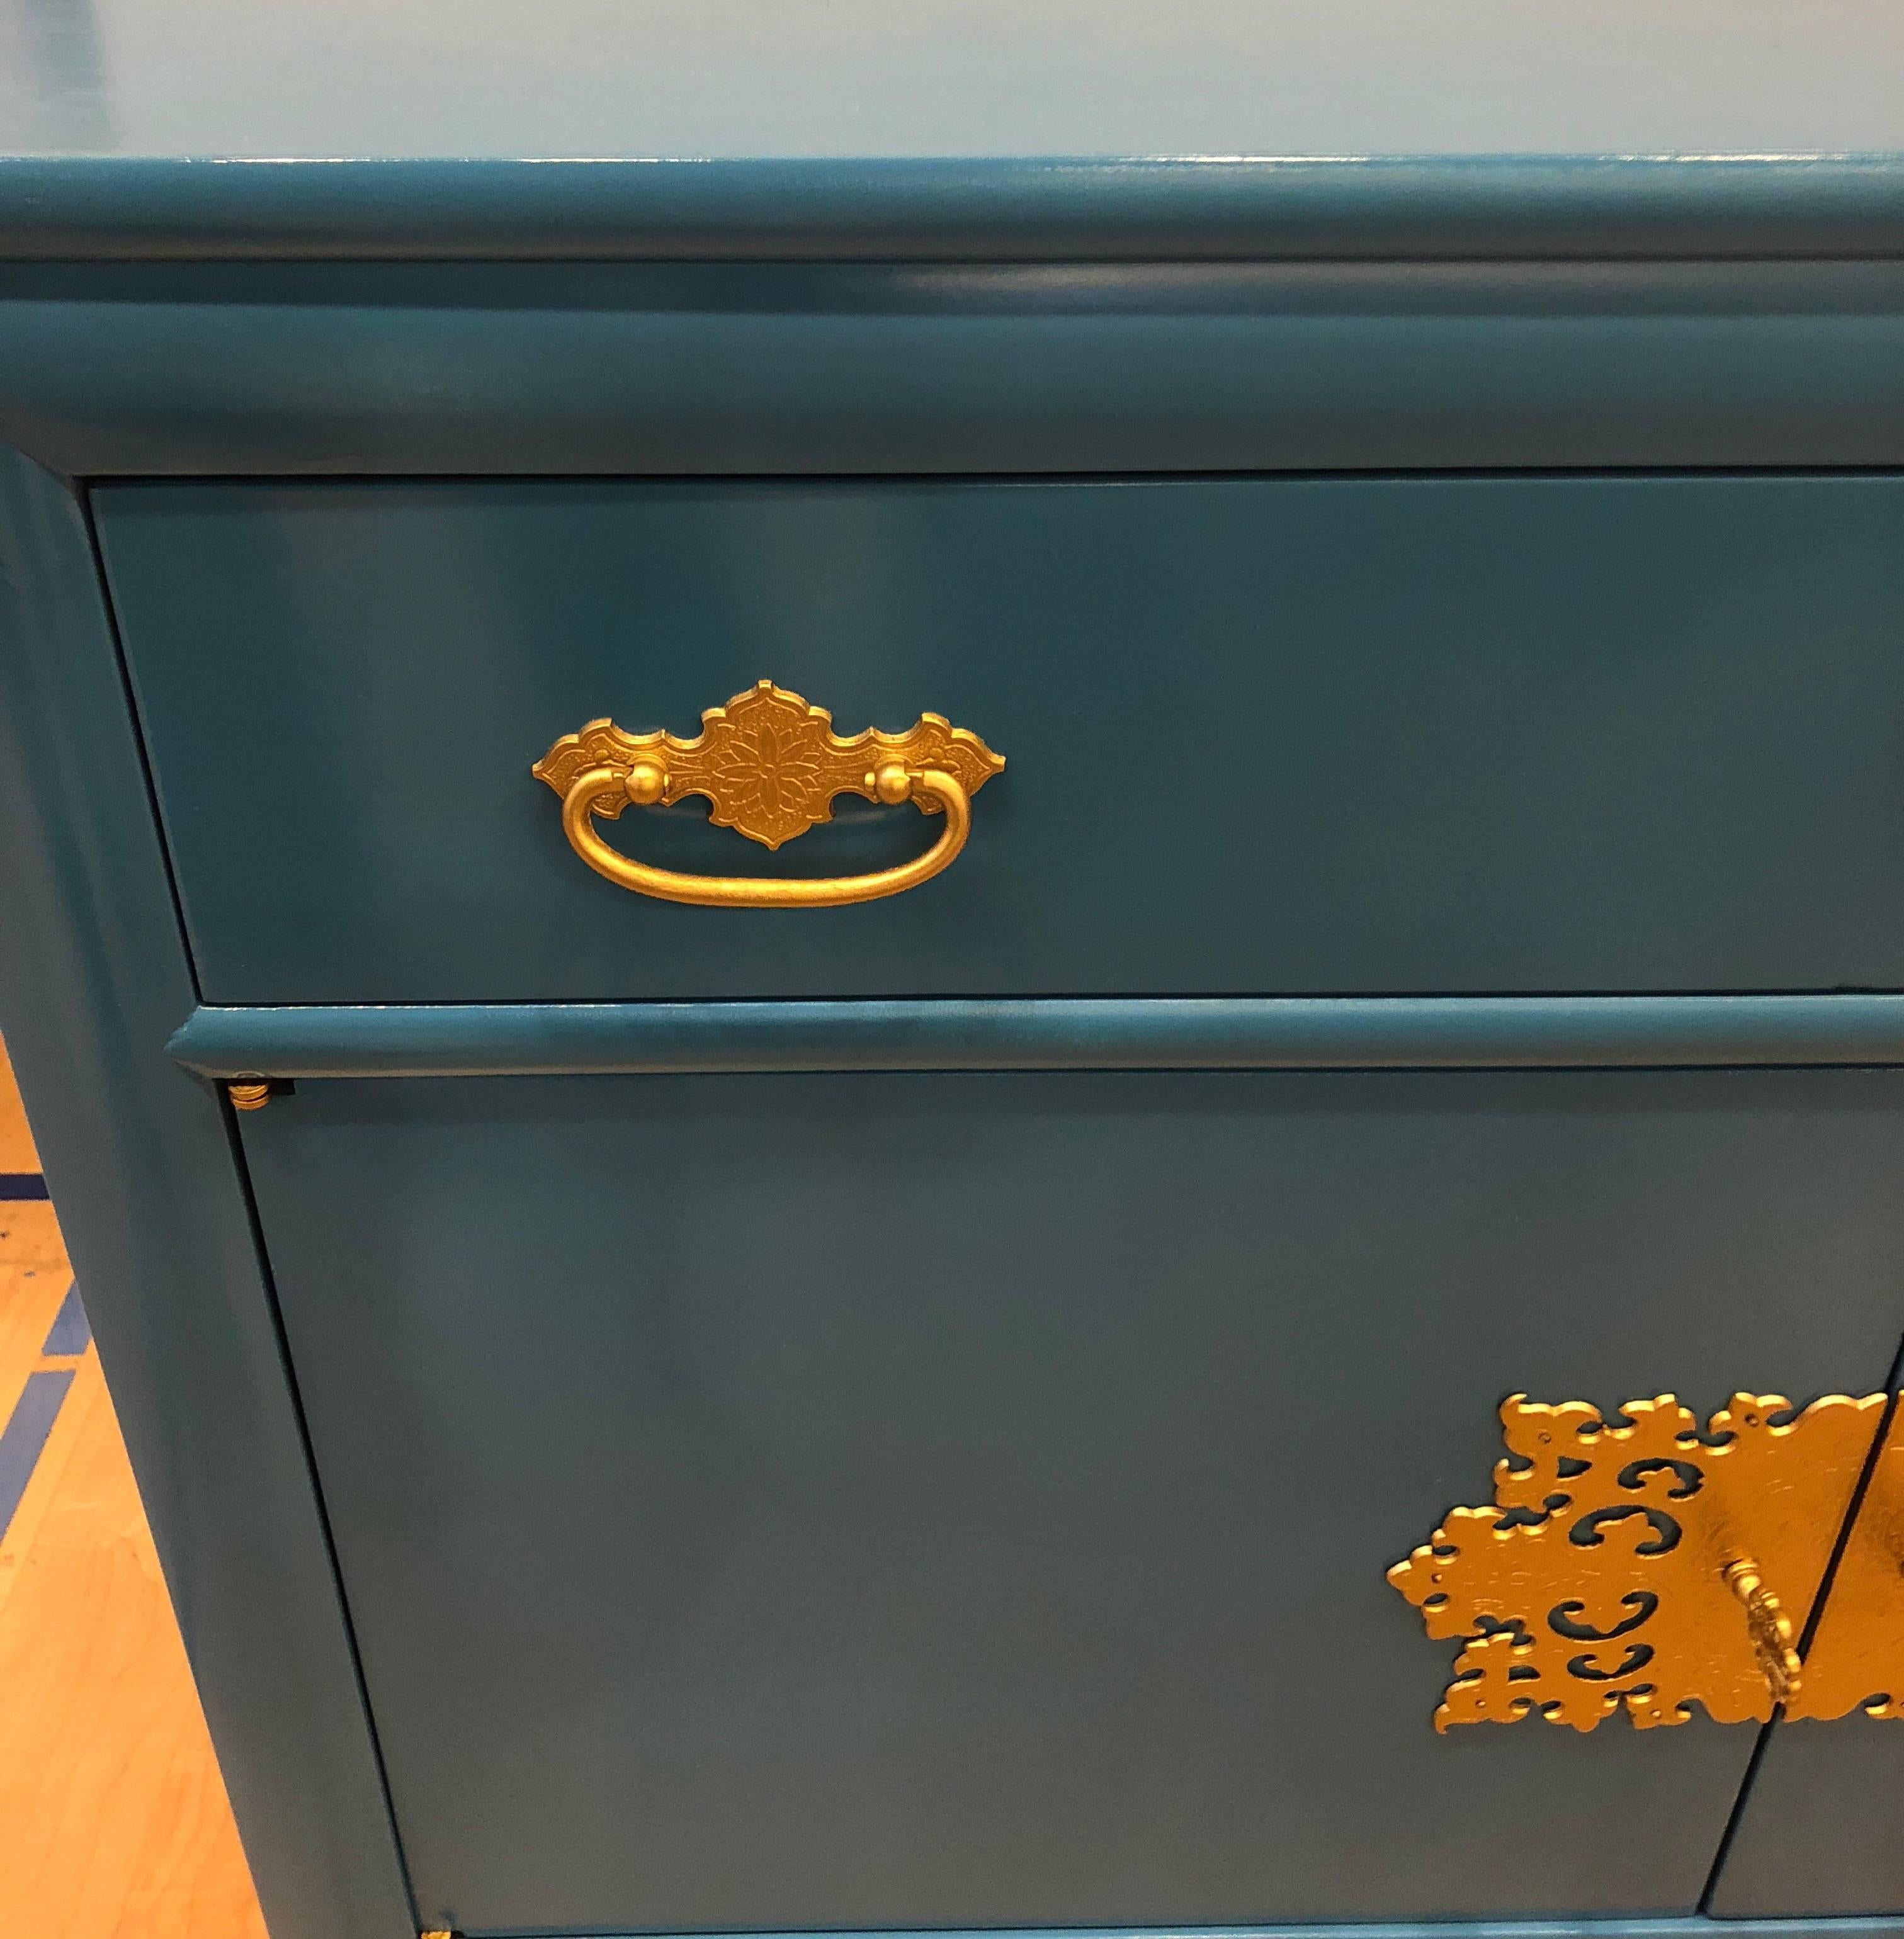 A excellent piece in Asiatic blue lacquered in perfect condition. Hardware done in a gold lacquering finish as well. Made by Century Furniture. Would be perfect for a vanity in a Asian themed bathroom or powder room.